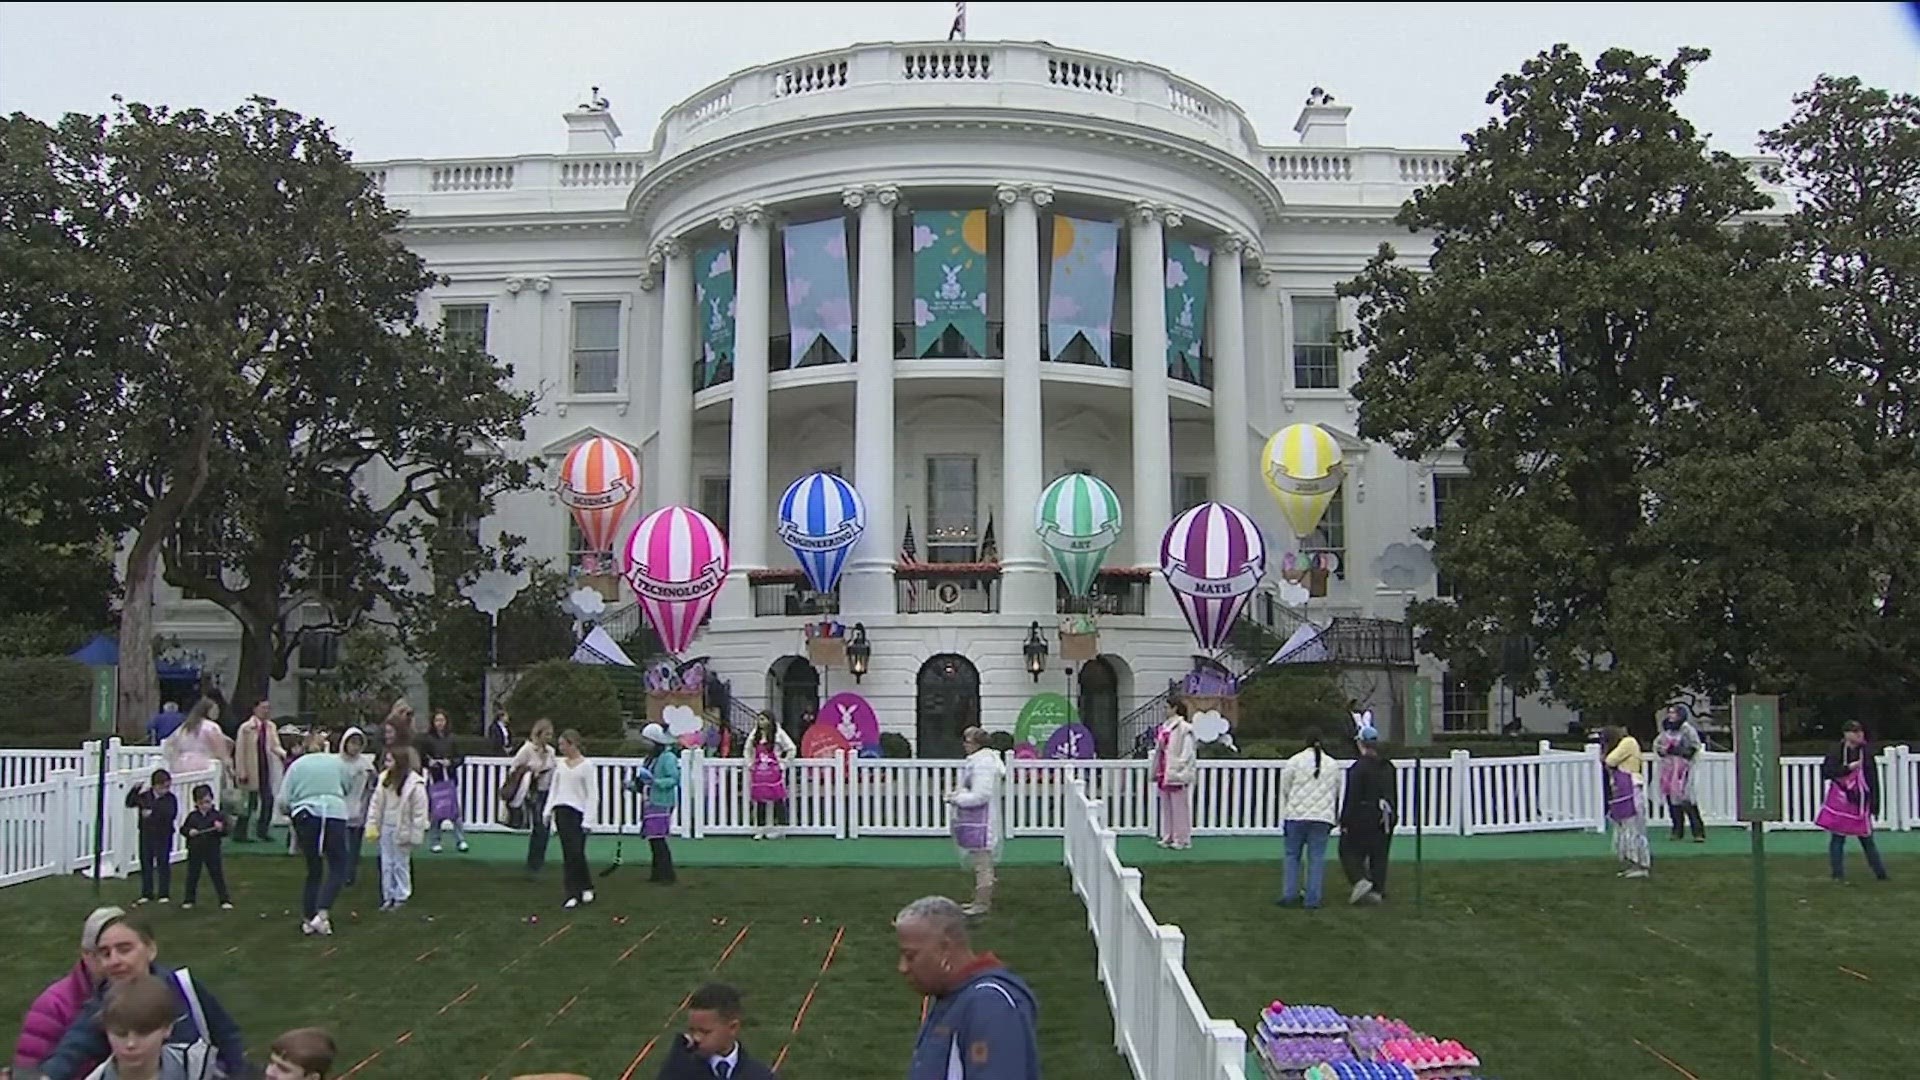 A thunderstorm didn't stop the White House from hosting its annual Easter Egg Roll.